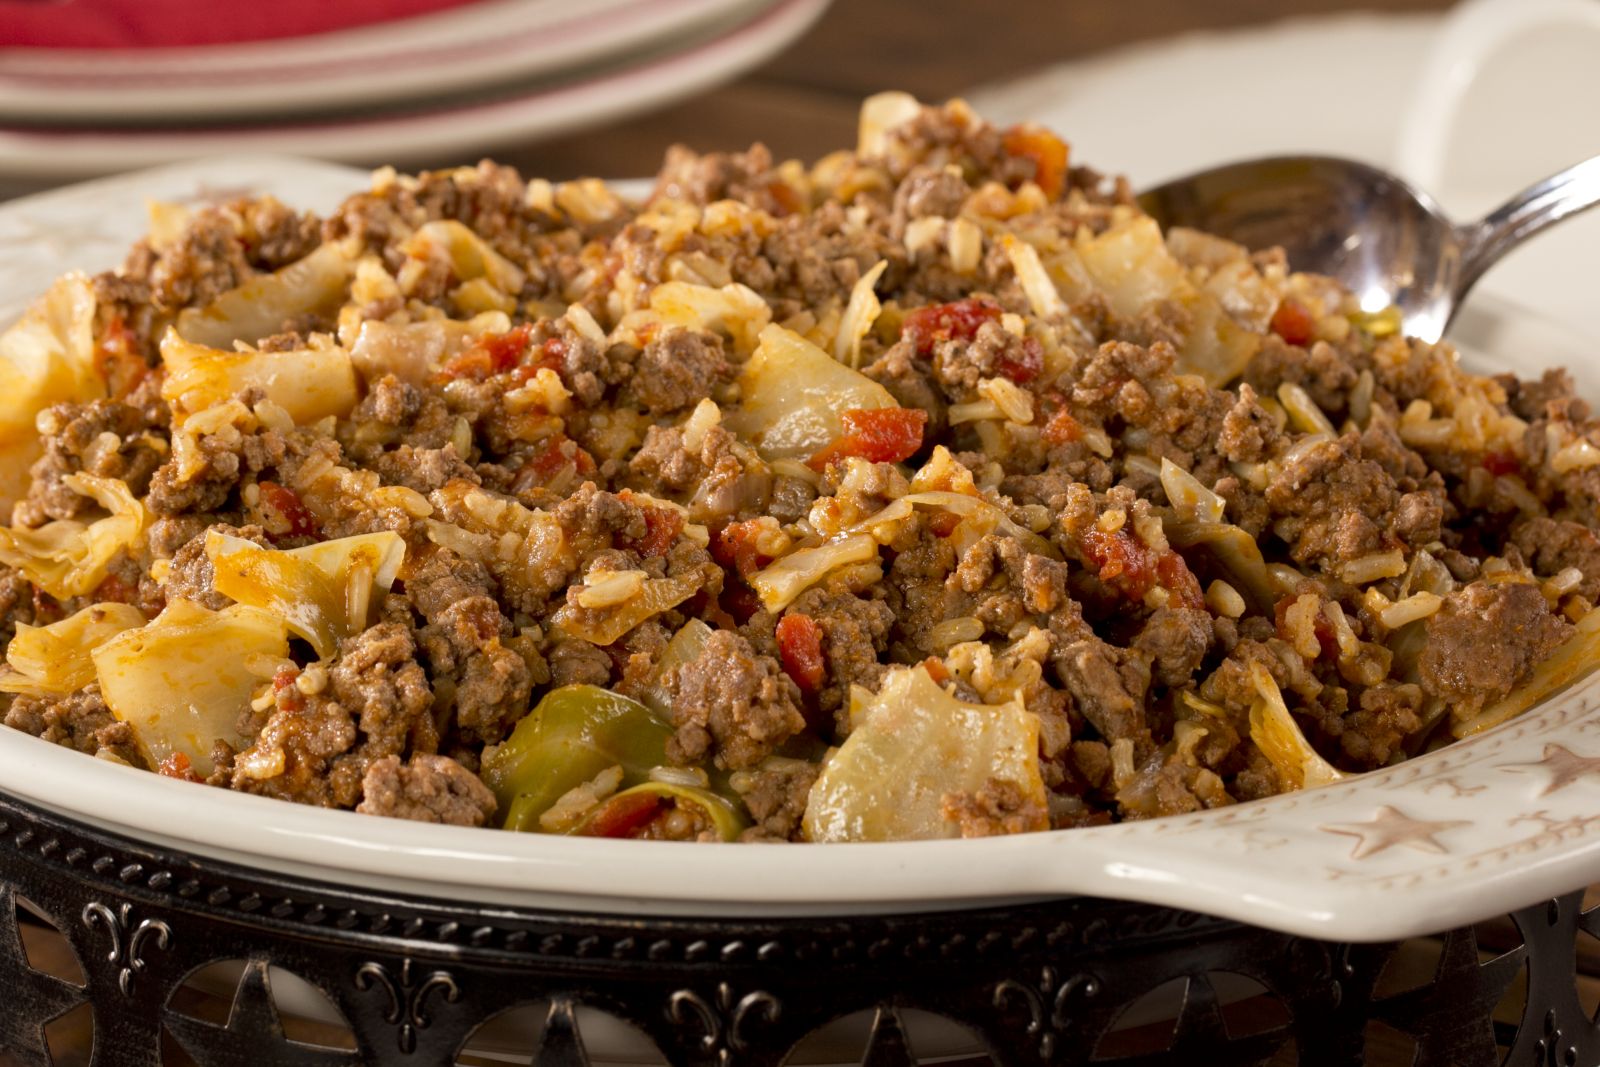 Diabetic Dinner Made With Ground Beef Recipe : Cowboy Casserole